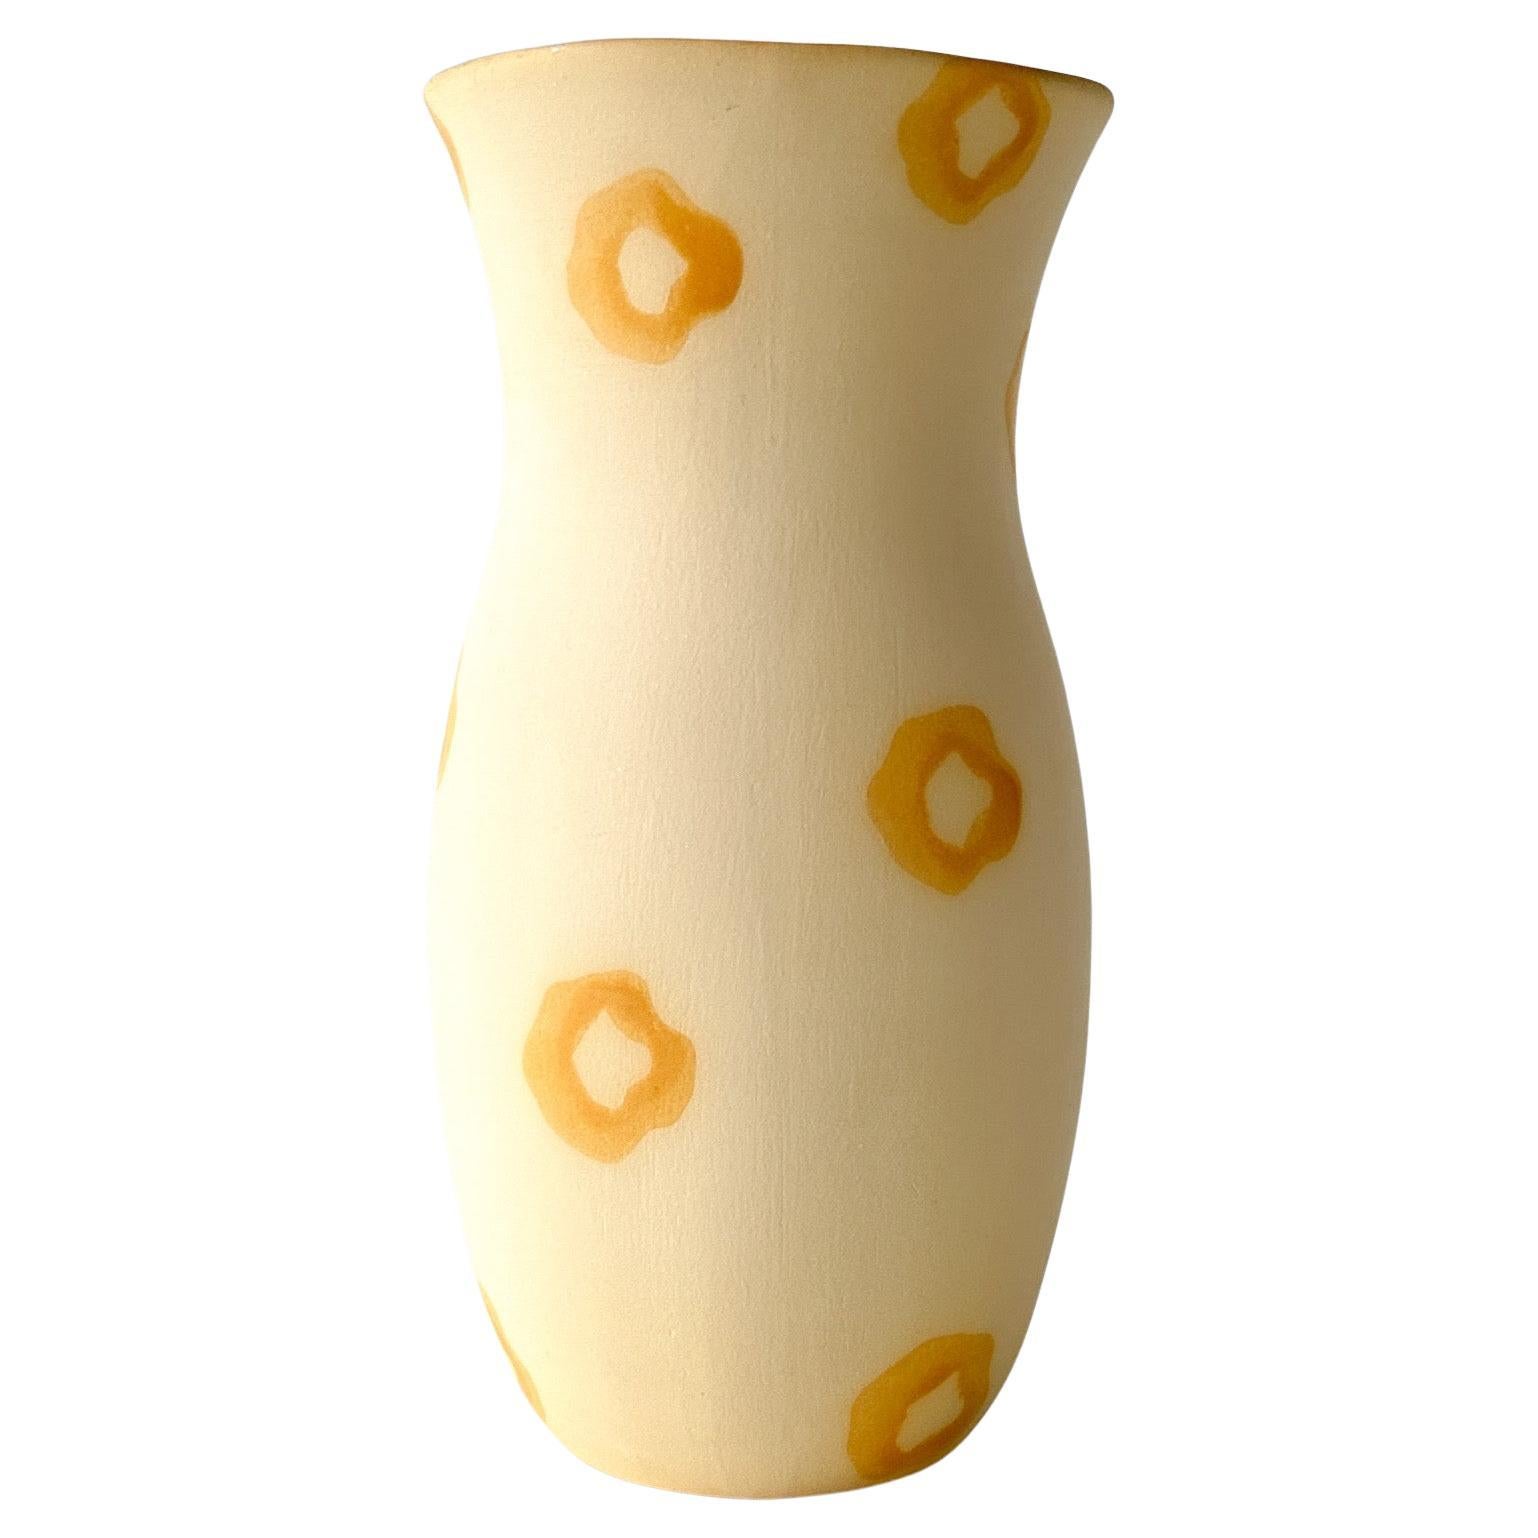 Circa 1980s Barbara Eigen ceramic postmodern vase. Pale yellow matte glaze with golden yellow gloss circles and glazed interior. 

About the artist: 
Eigen studied ceramics at the Boston Museum of Fine Arts School and Alfred University. A professor